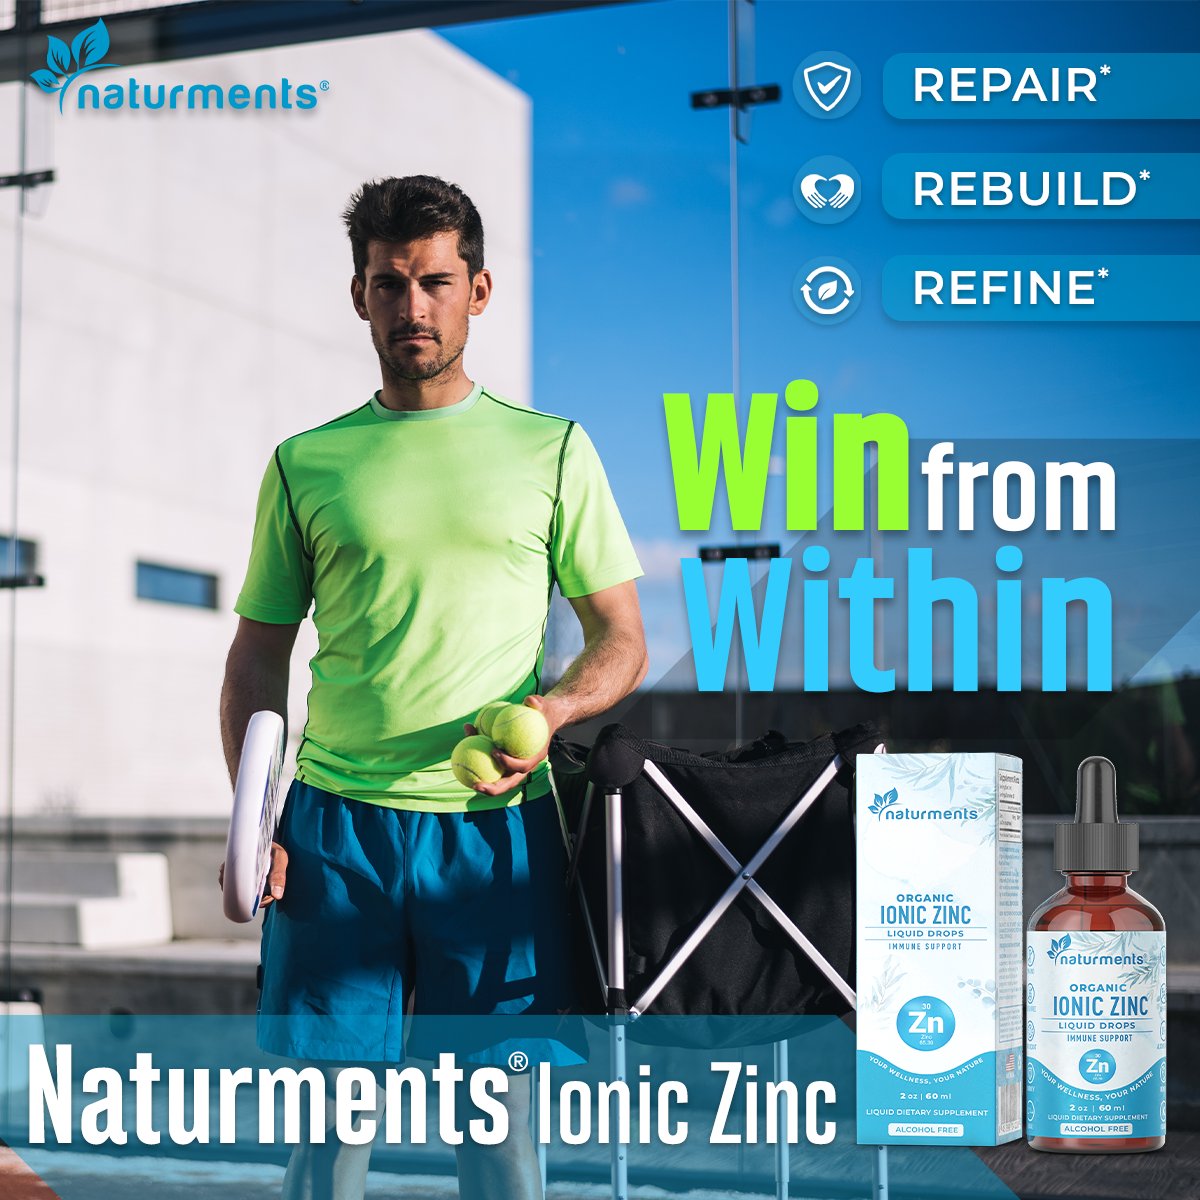 Zinc is indispensable owing to its role in keeping you functional and healthy. Pure Ionic Concentrated Drops of Zinc are a great way to a well-maintained metabolism and quick damage repair.
😍
#zinc #sportsnutrition #naturments #padel #padeltime #lovepadel